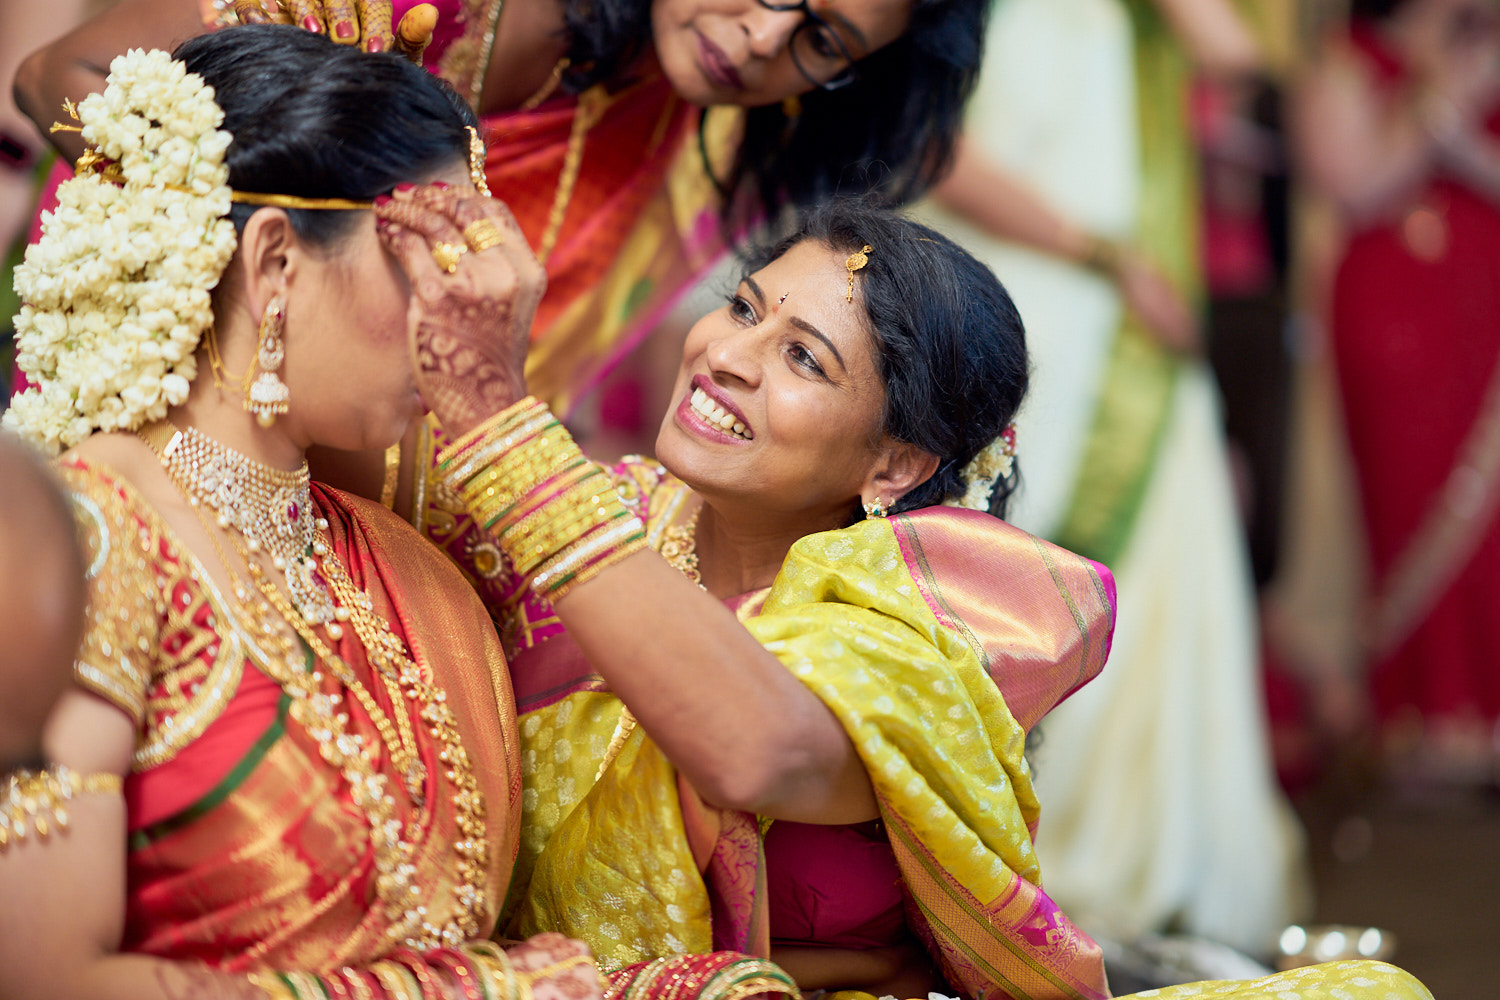 south-indian-wedding-ceremony-photography-by-afewgoodclicks-net-in-saratoga 15.jpg